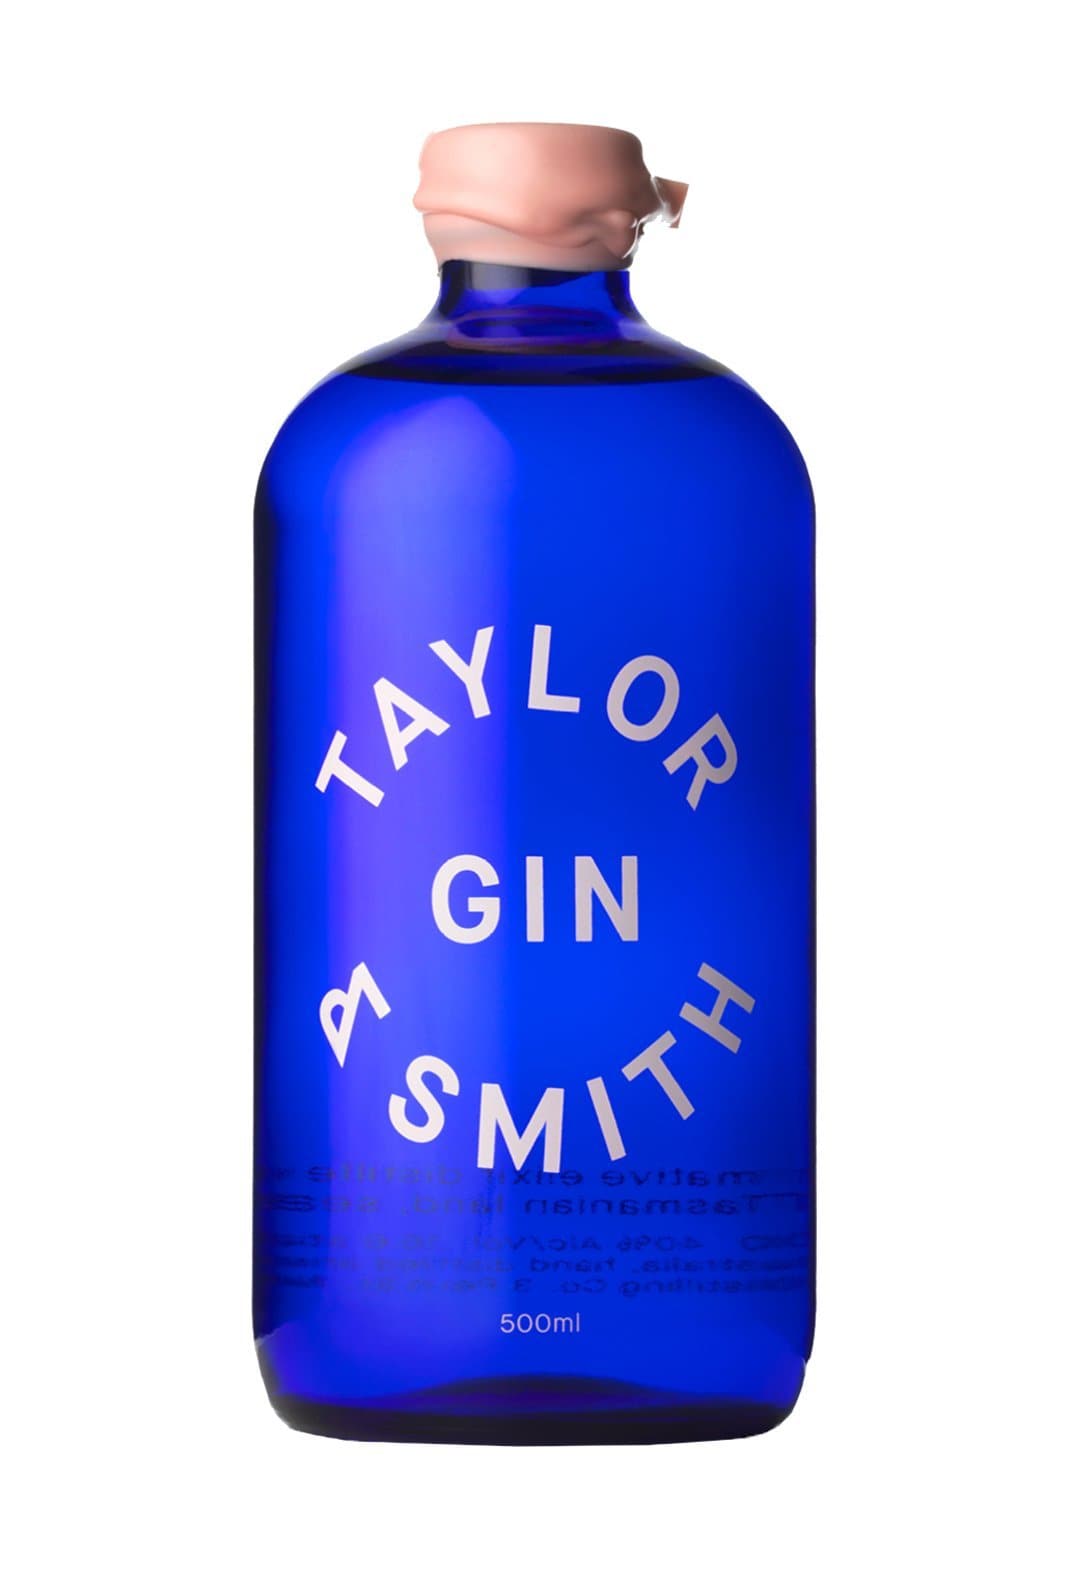 Taylor & Smith Gin 40% 500ml | Gin | Shop online at Spirits of France